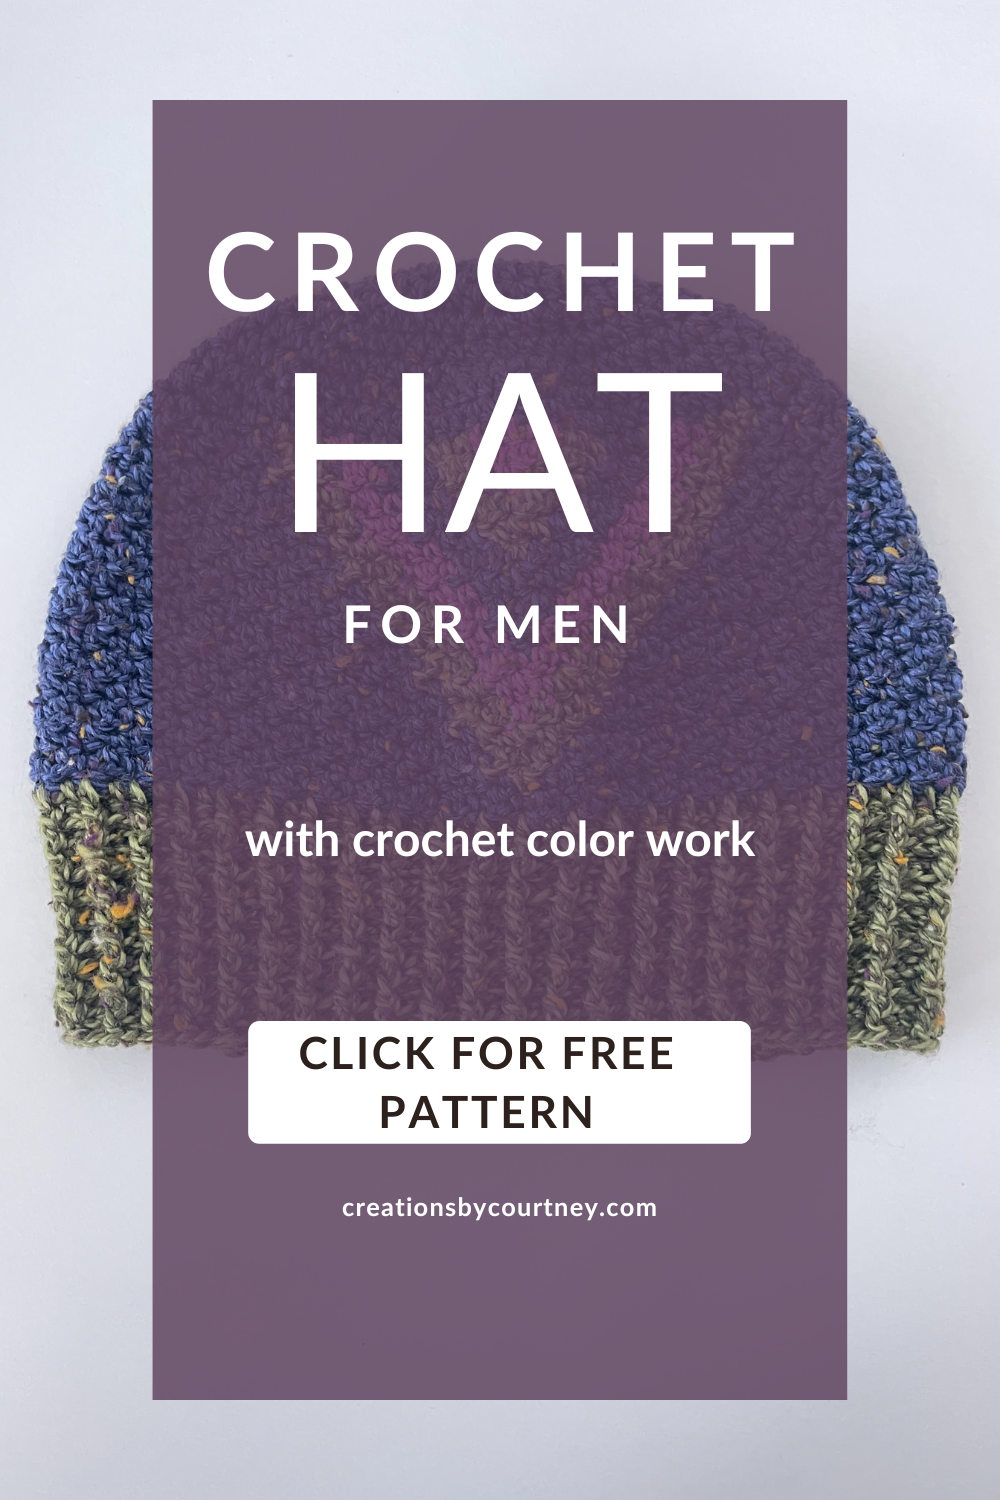 A pin image of a crochet hat in the background that is partially hidden behind an opaque purple box. The words crochet hat for me with crochet color work and a button that says "click for free pattern" are written on the purple box further hiding the image of the hat.